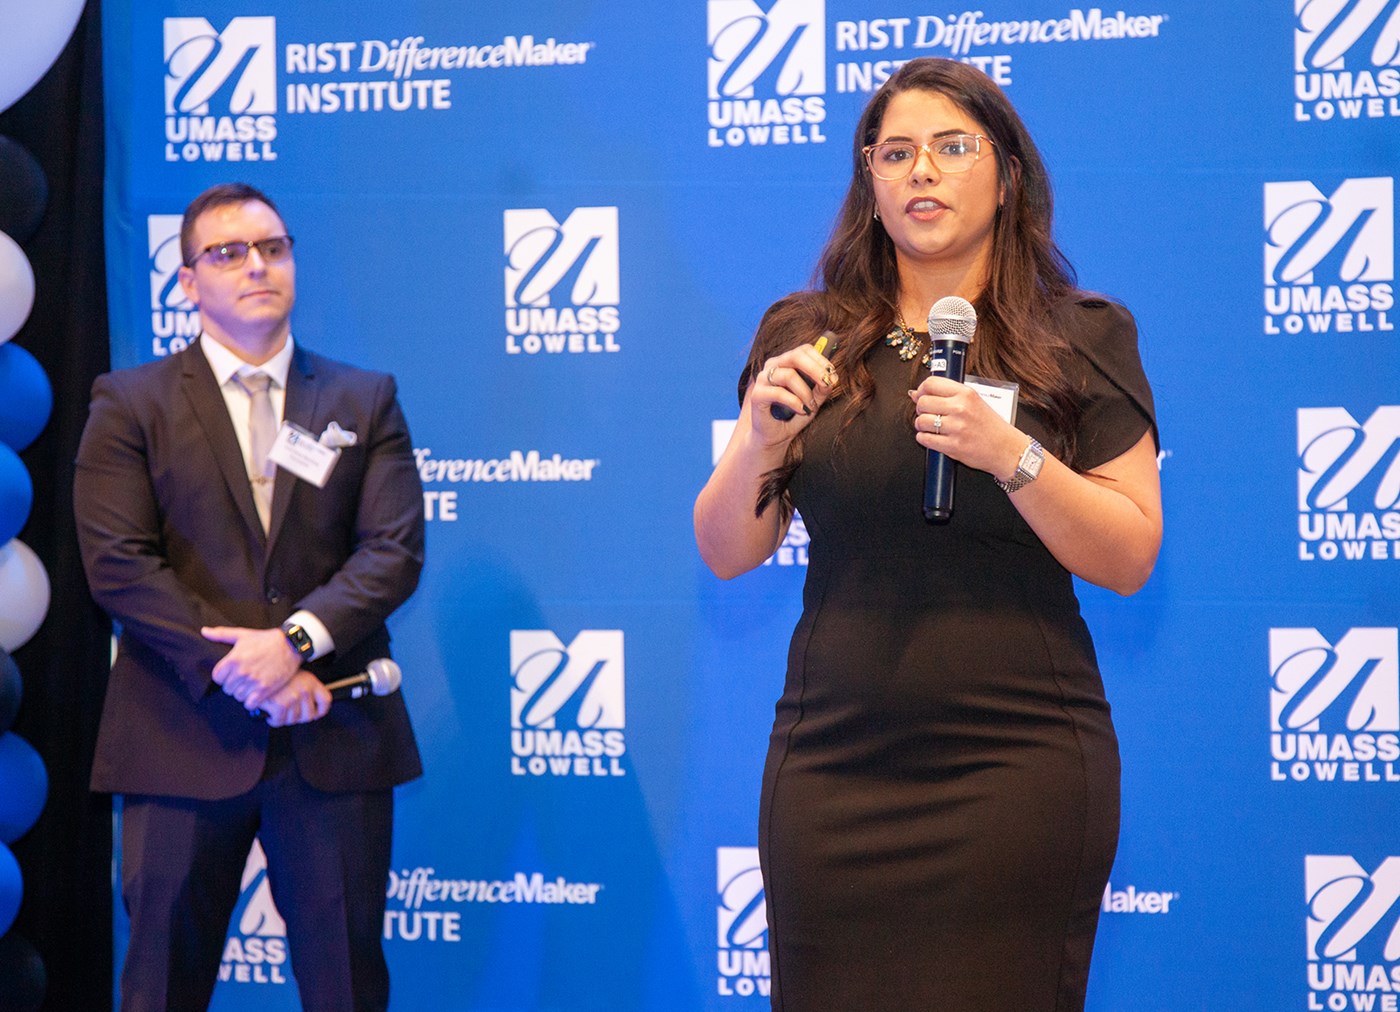 Ariel Pena-Martinez, computer engineering graduate student, holding a microphone and speaking in front of blue UMass Lowell backdrop while Grissel Cervantes-Jaramillo looks on.